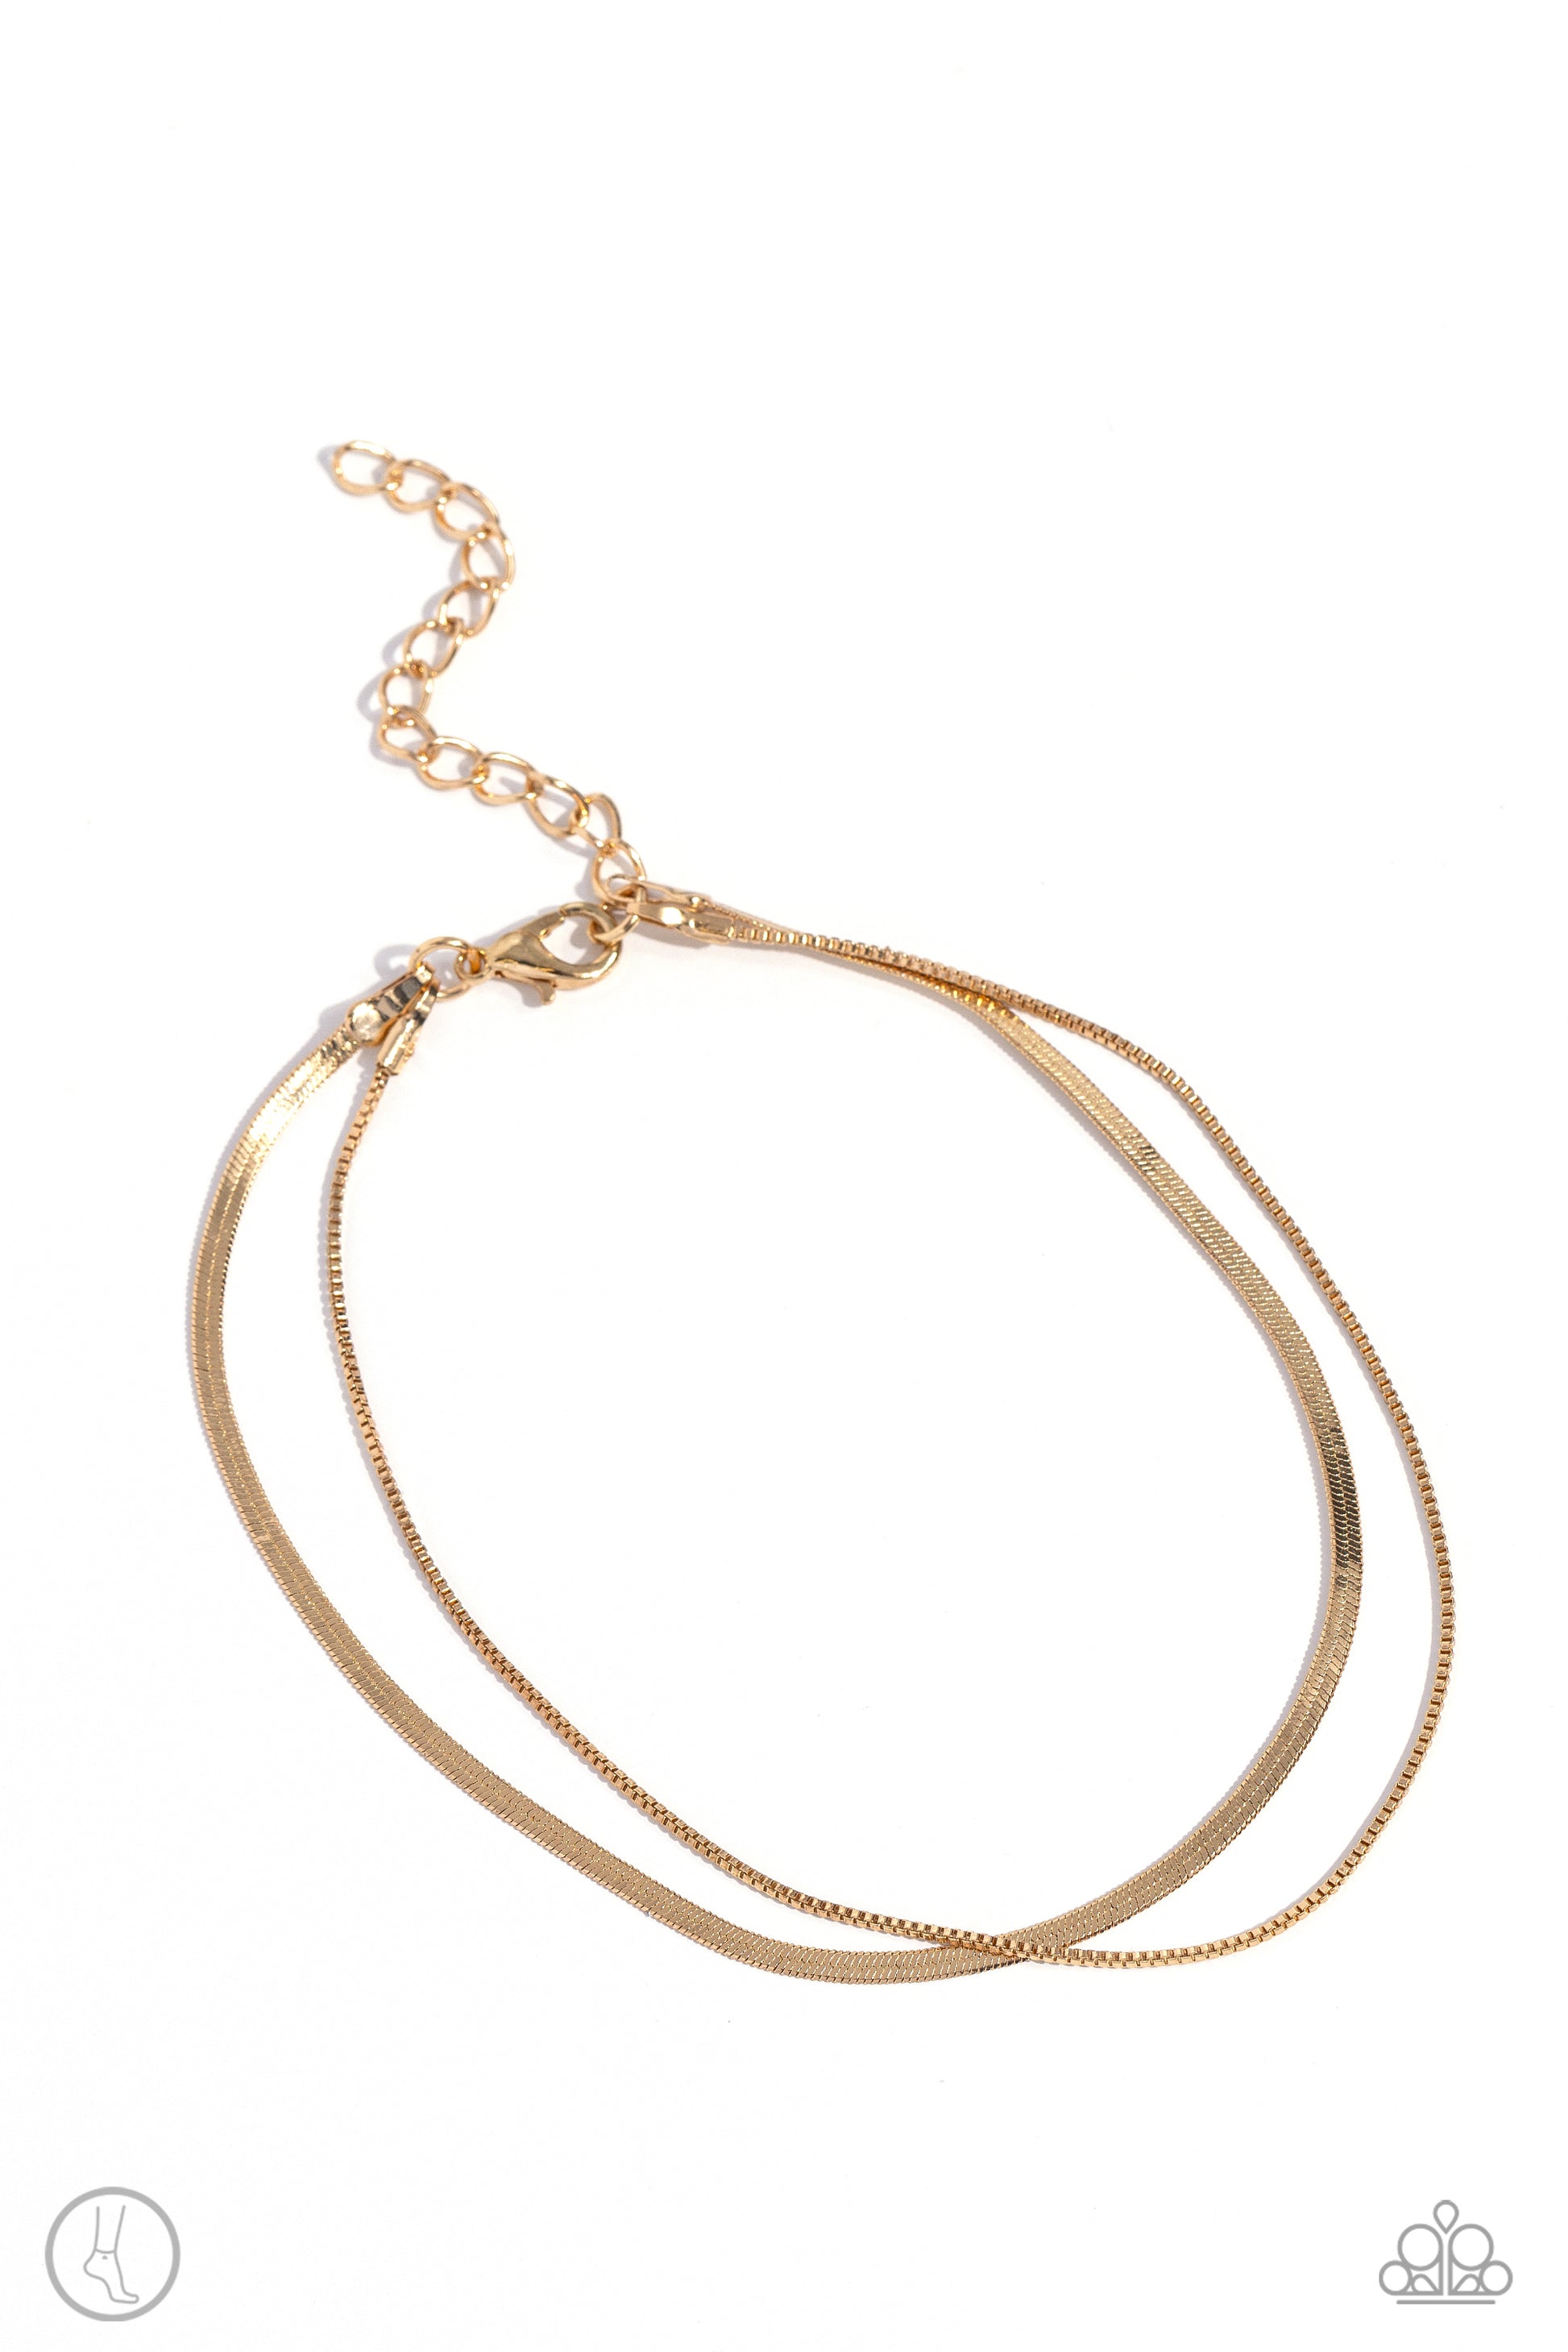 <p>Paparazzi Accessories - Glistening Gauge - Gold Anklets a strand of flat gold snake chain collides with a dainty square box chain to create an abstract monochromatic display. Features an adjustable clasp closure.</p> <p><i>Sold as one individual anklet.</i></p>